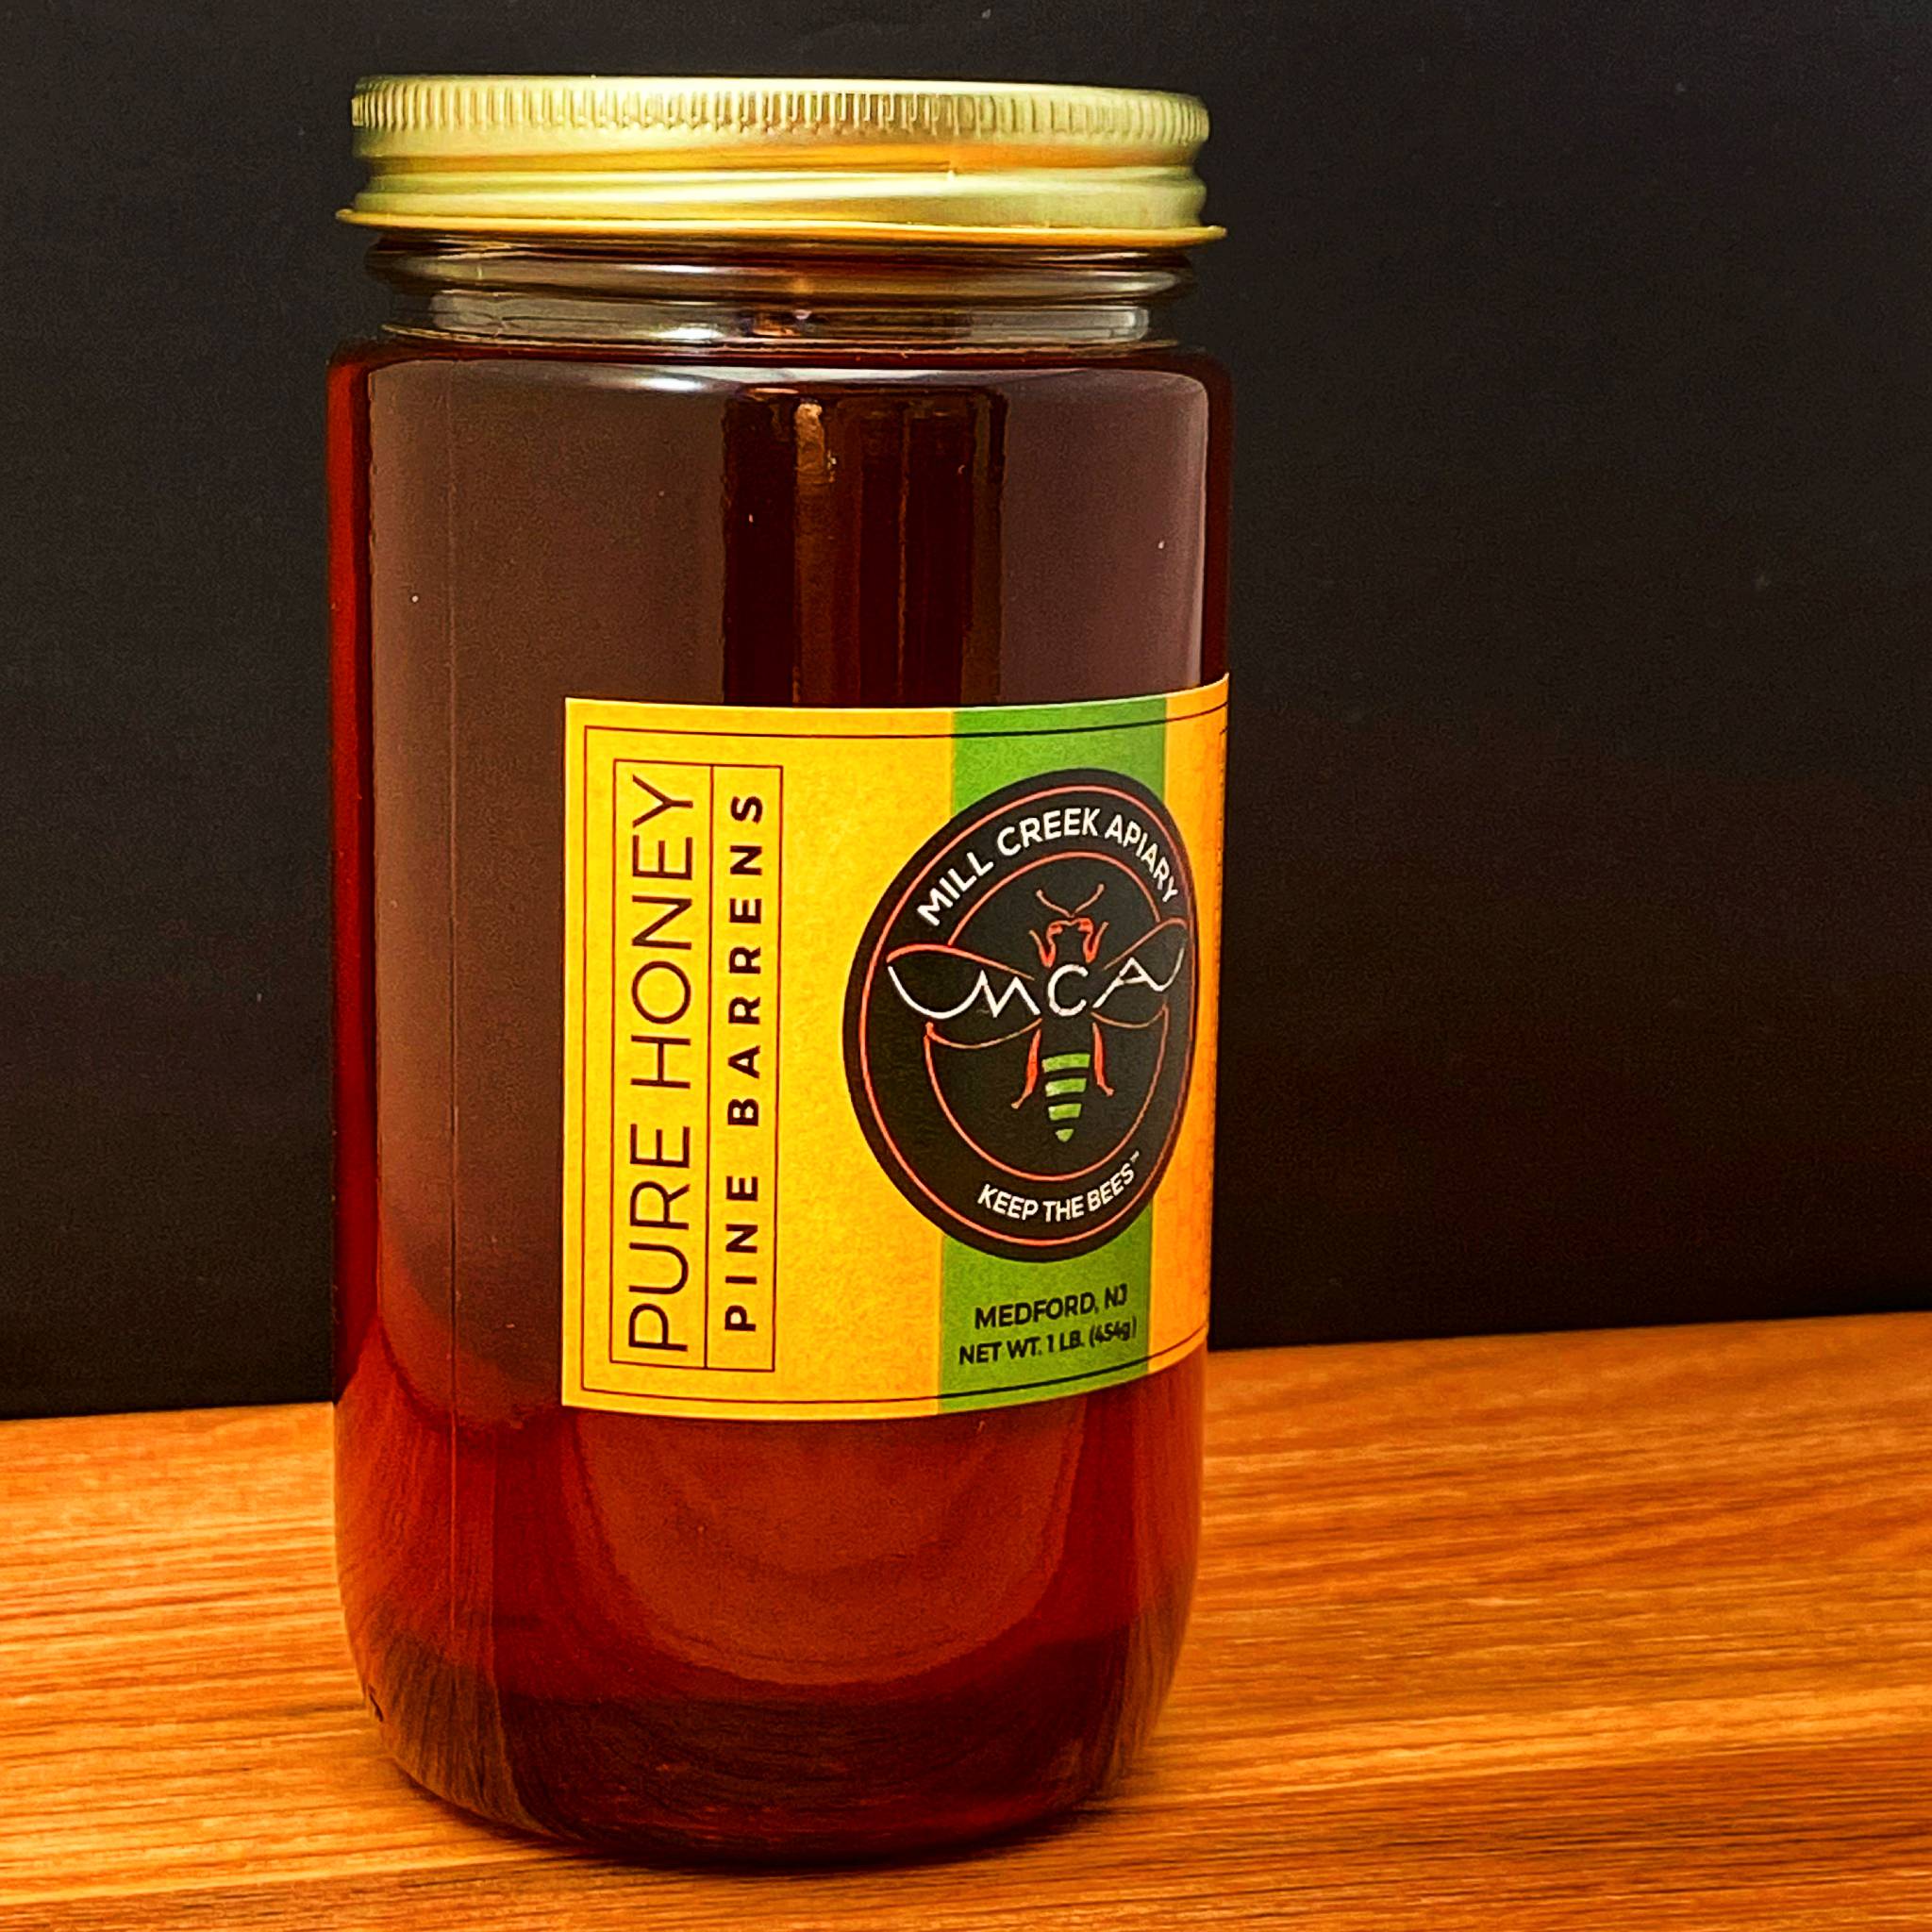 Pine Barrens honey from Mill Creek Apiary is bold, smooth and velvety, 